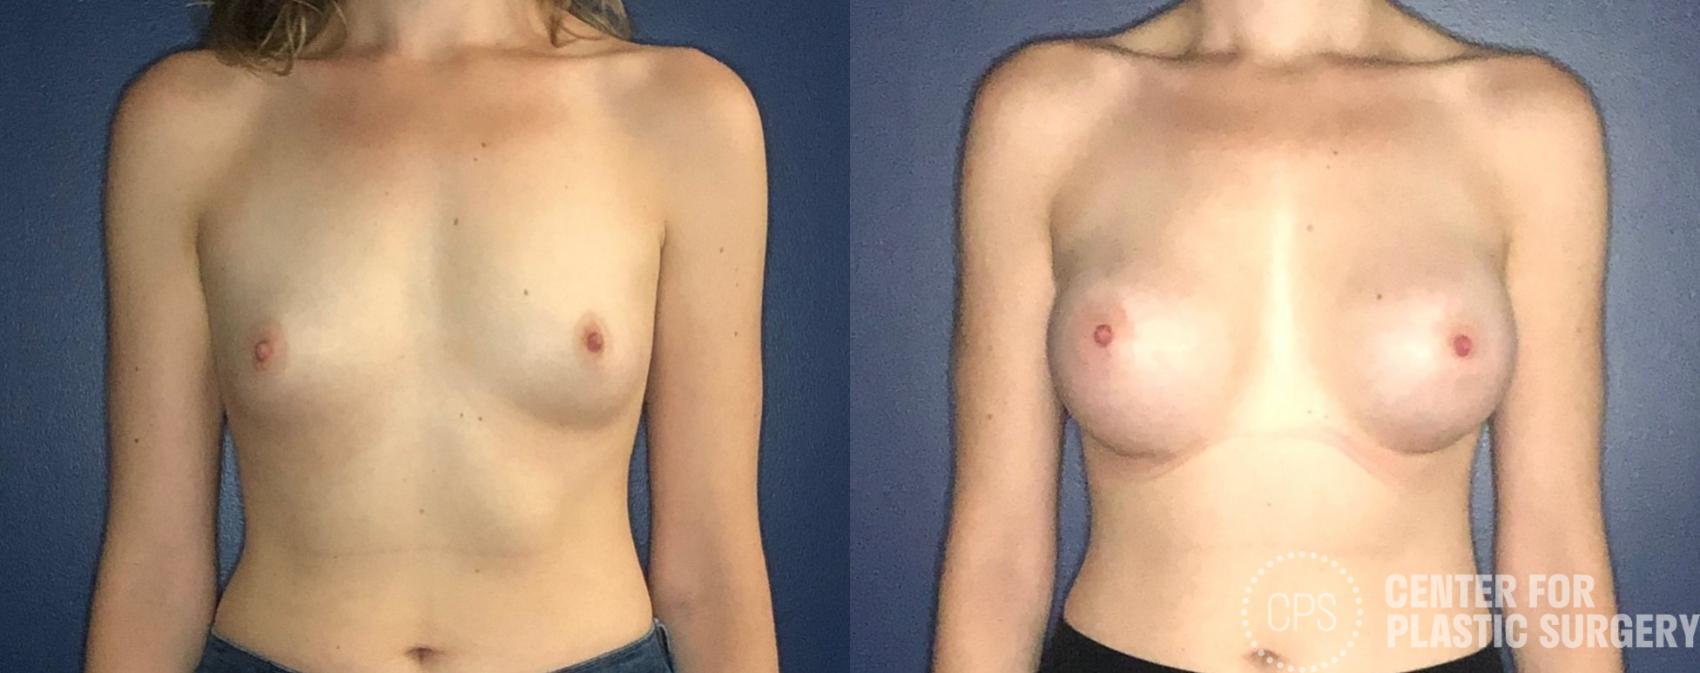 Breast Augmentation Case 222 Before & After Front | Chevy Chase & Annandale, Washington D.C. Metropolitan Area | Center for Plastic Surgery